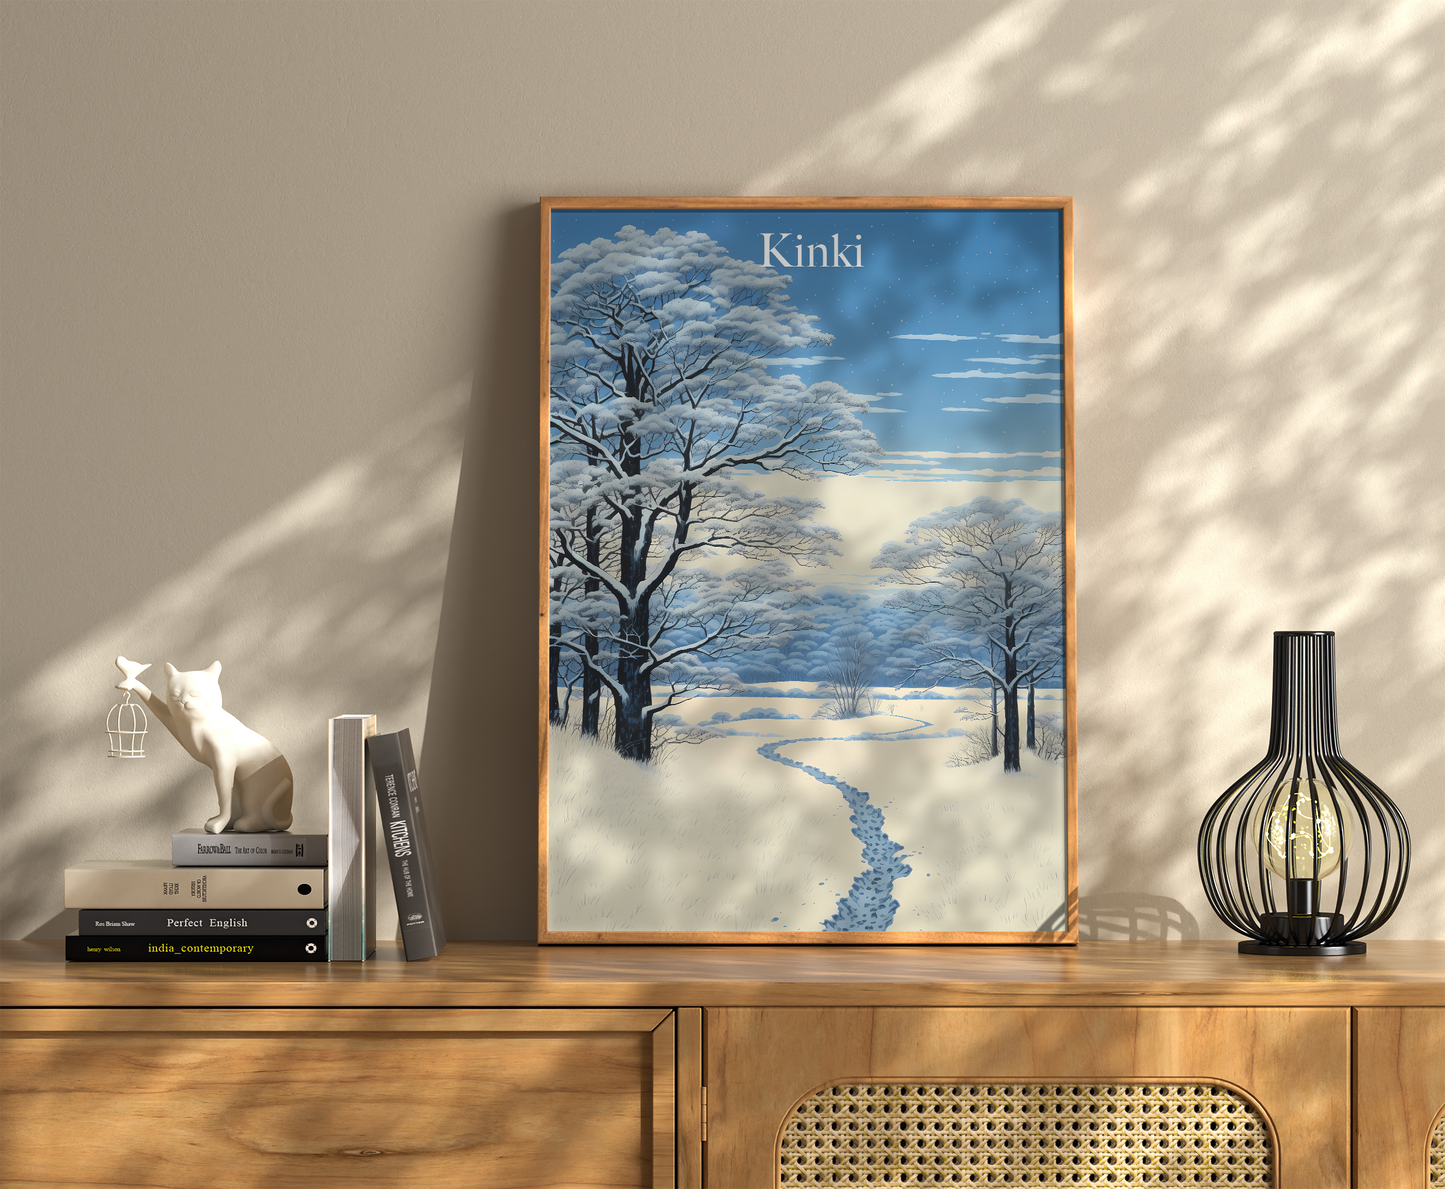 A framed winter landscape painting on a wall above a wooden cabinet with books and decorative items.